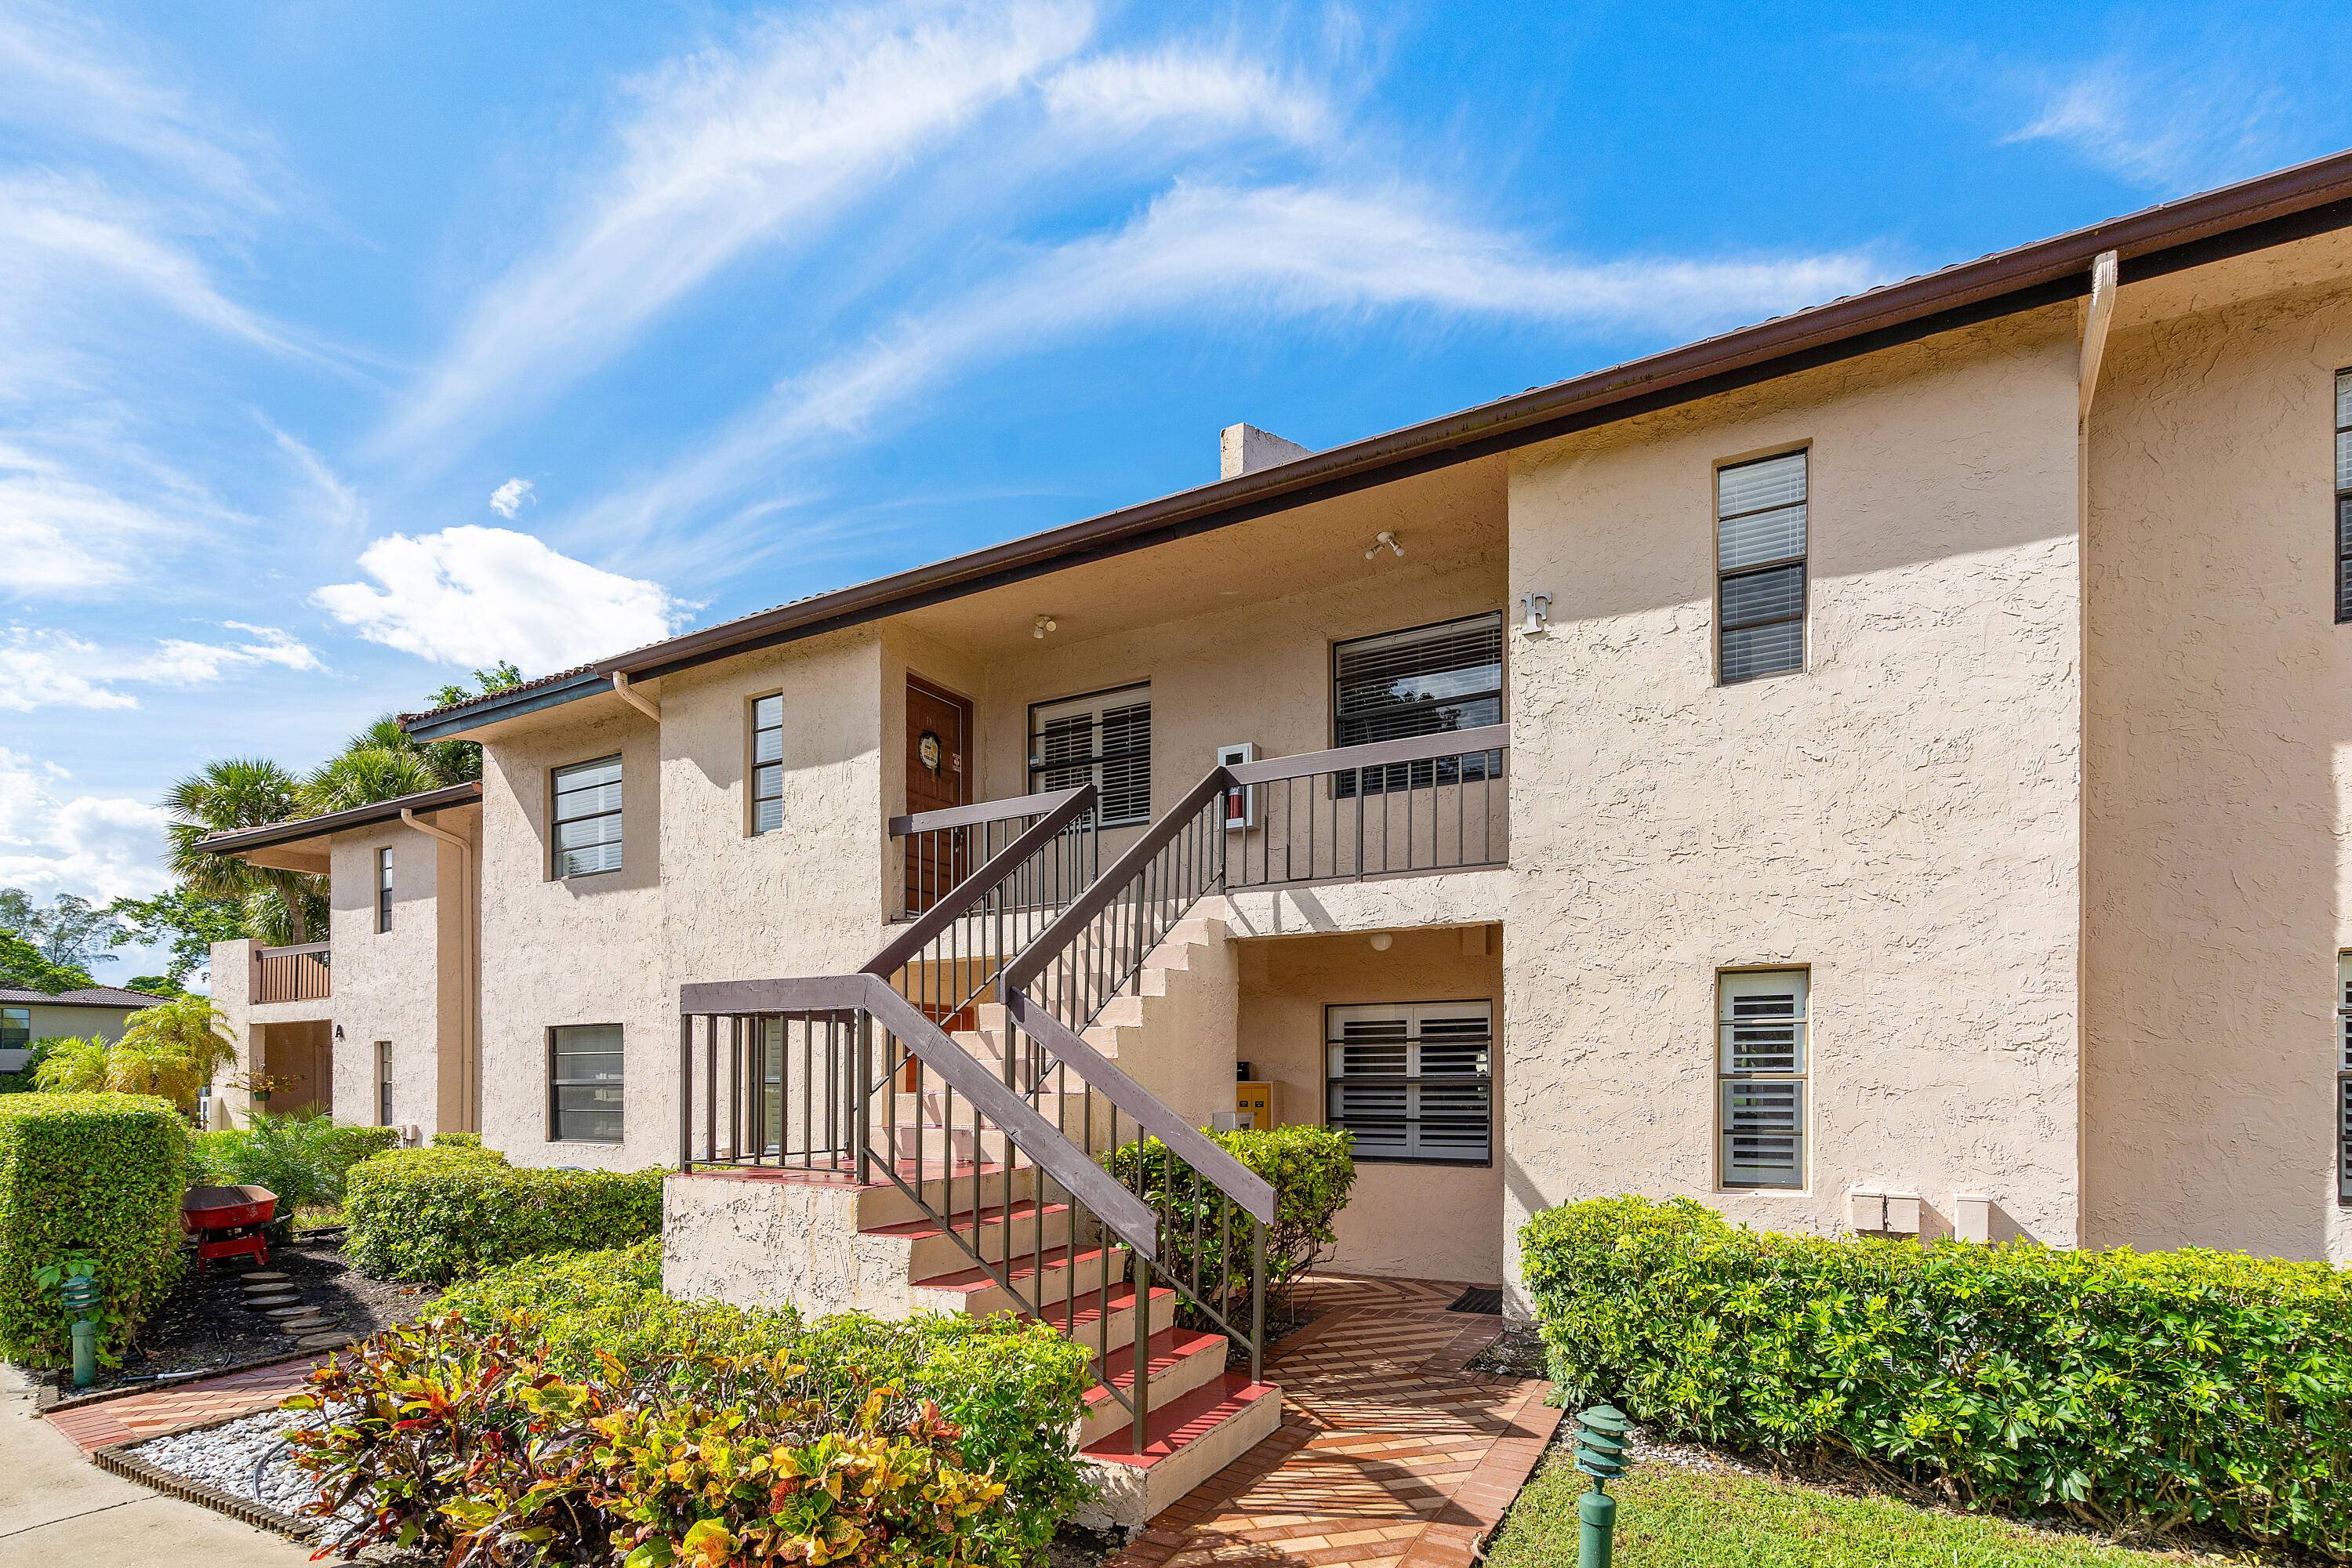 This beautifully renovated 2 bedroom condo has a wonderful open concept floor plan which leads to the expanded Florida room with fantastic views of the lake.